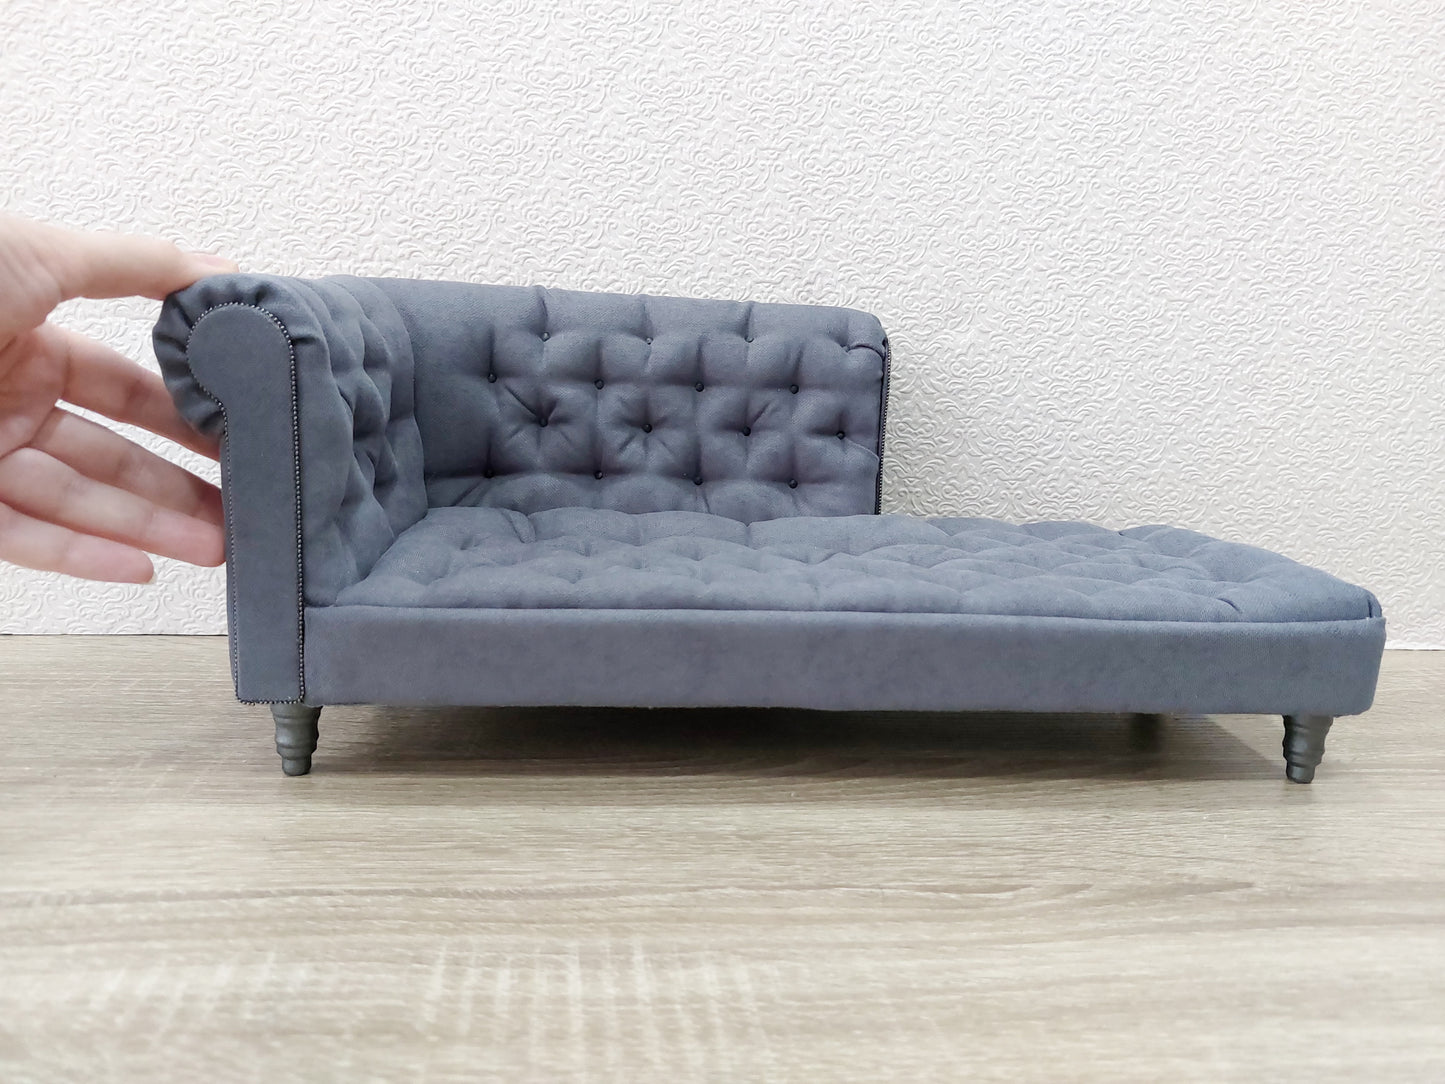 Chesterfield chaise lounge, gray